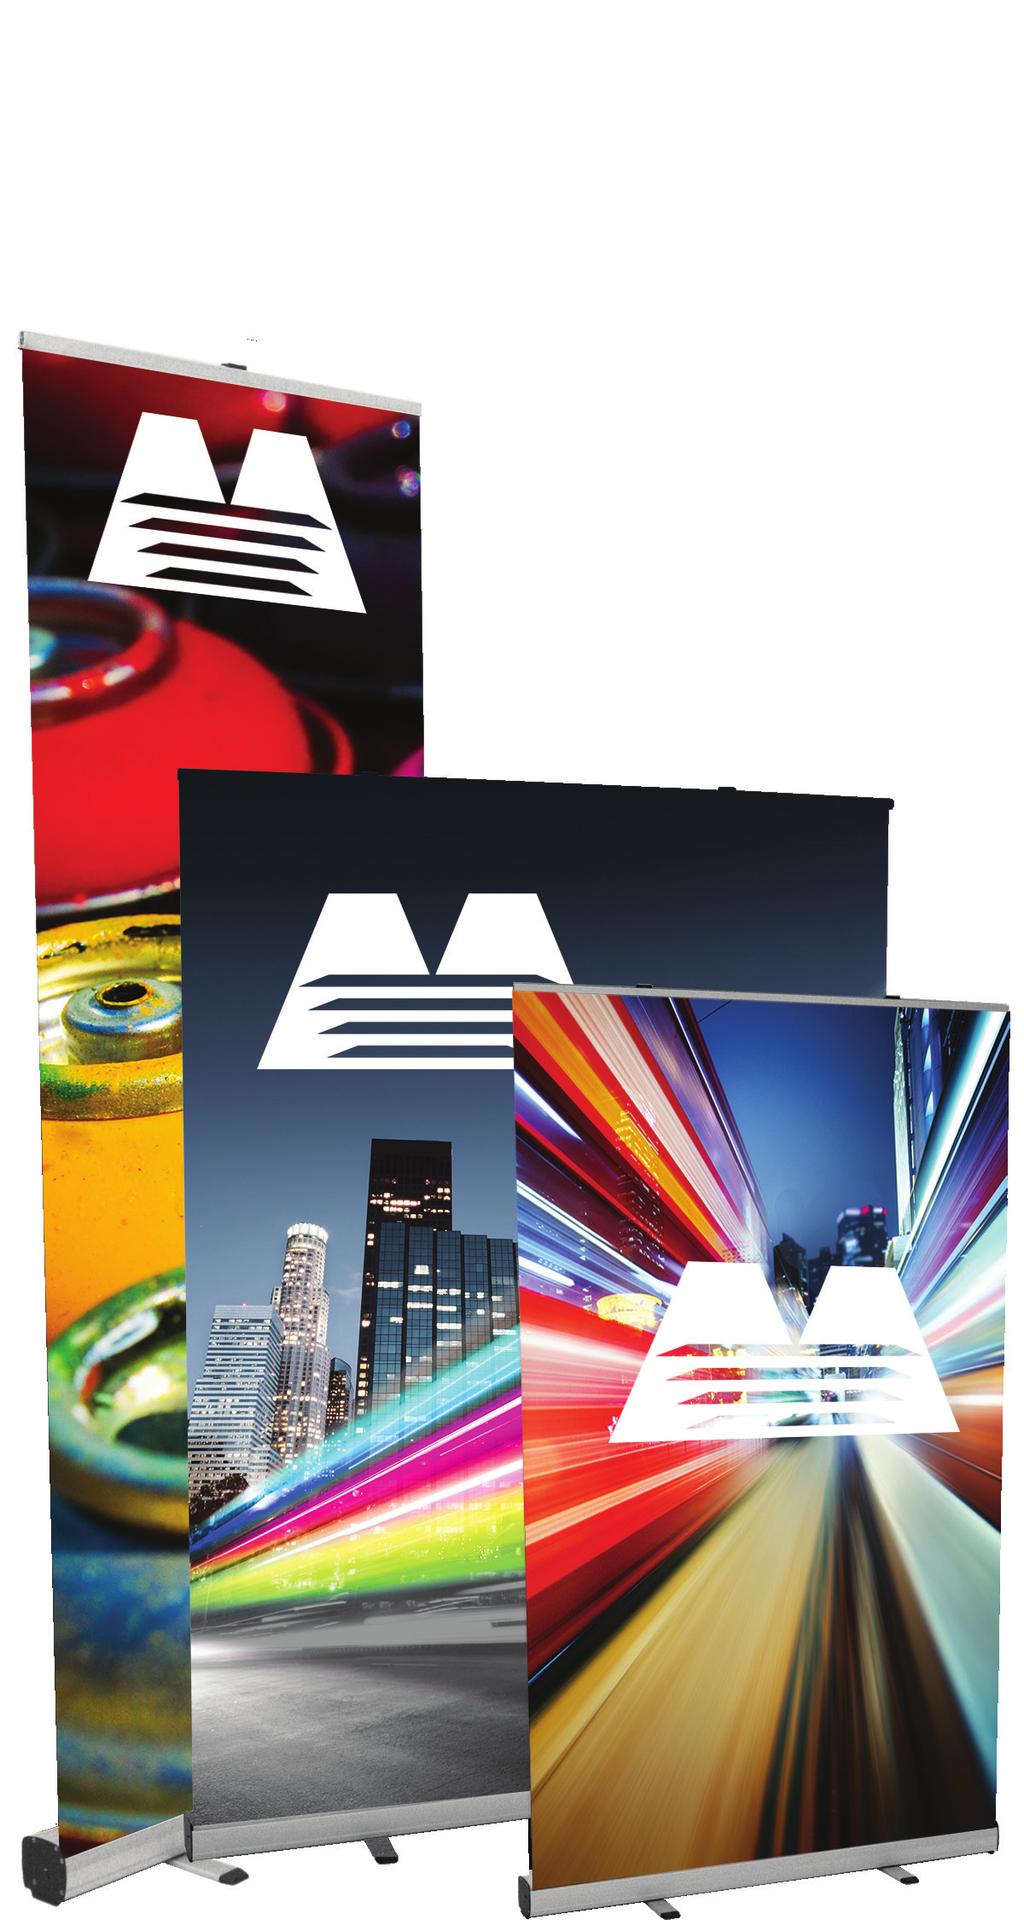 Retractable Banners and Pop Ups Retractable banner stands offer lightweight flexibility, functionality and durability for presentations, demonstrations, tradeshows